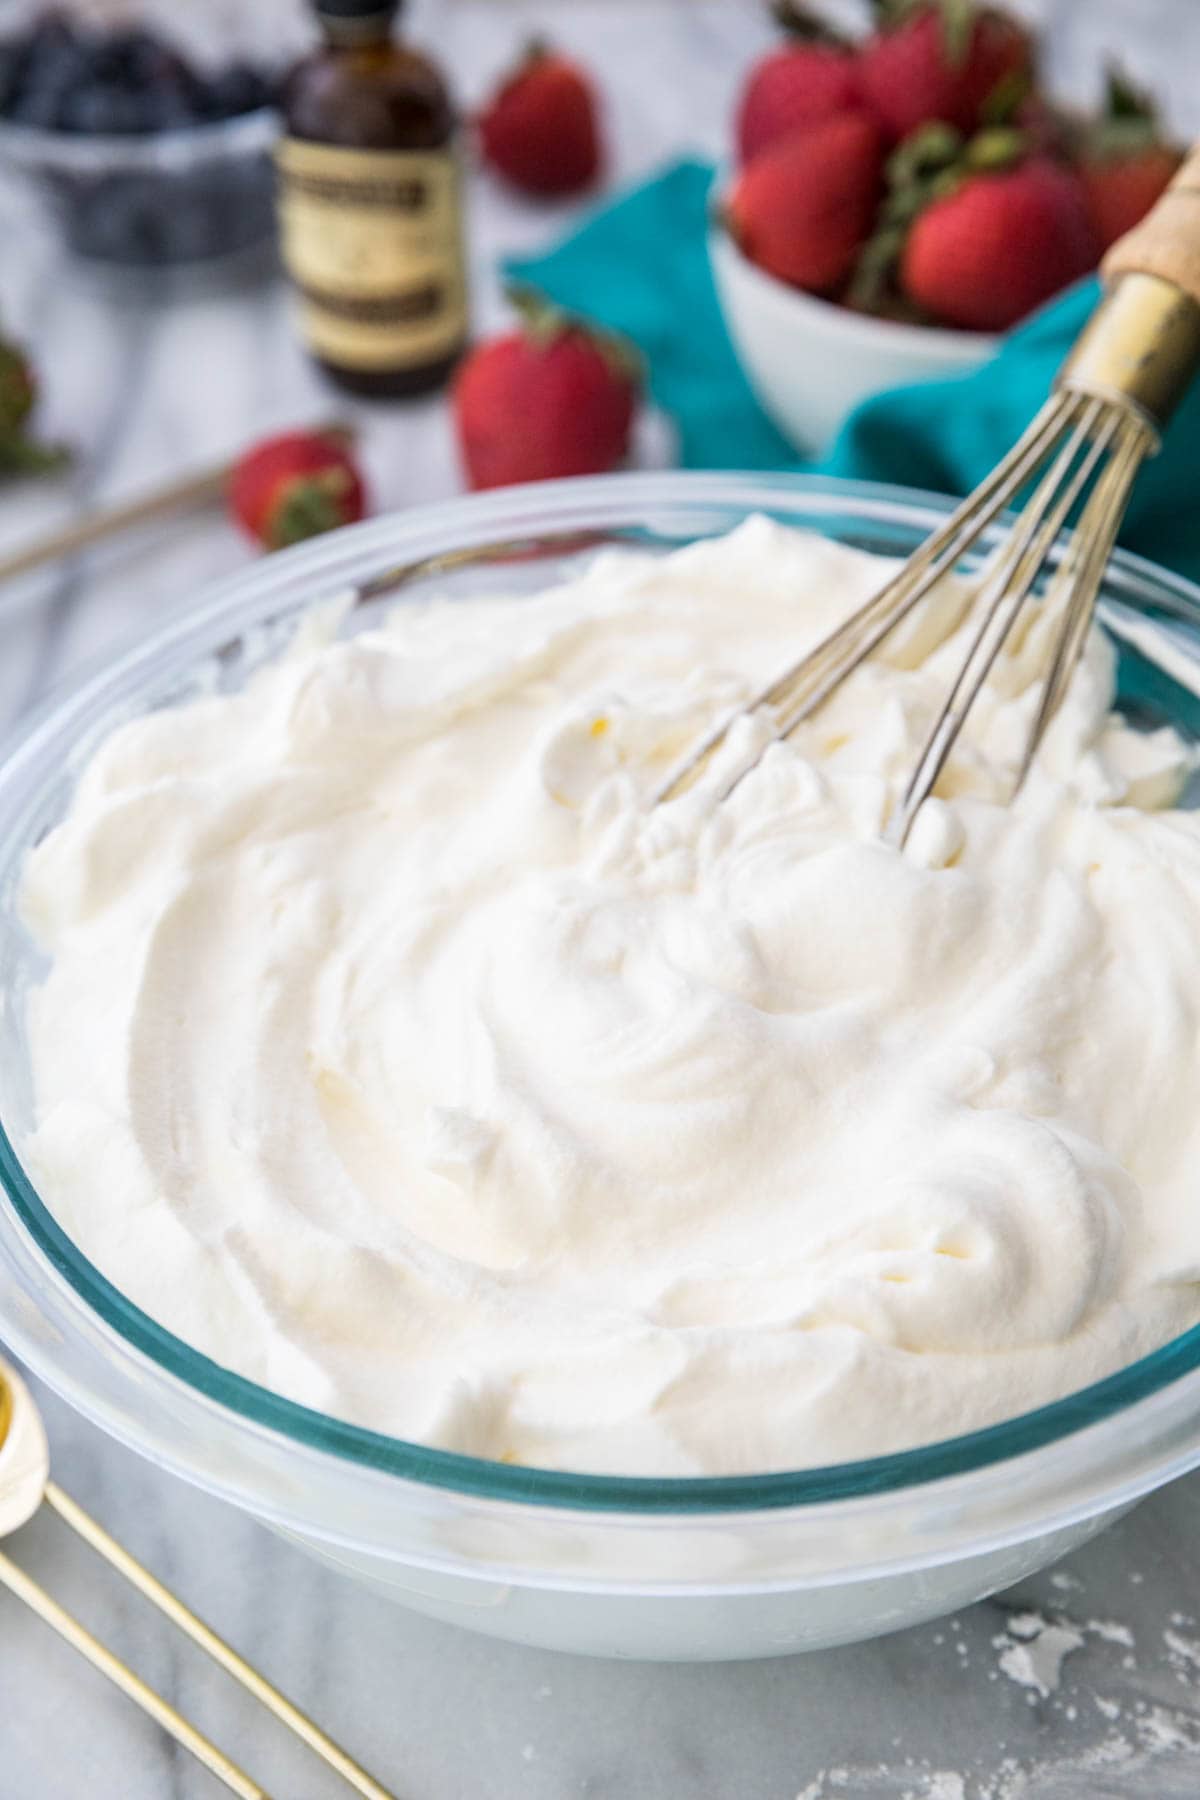 Clear glass mixing bowl filled with billowy whipped cream and a whisk.